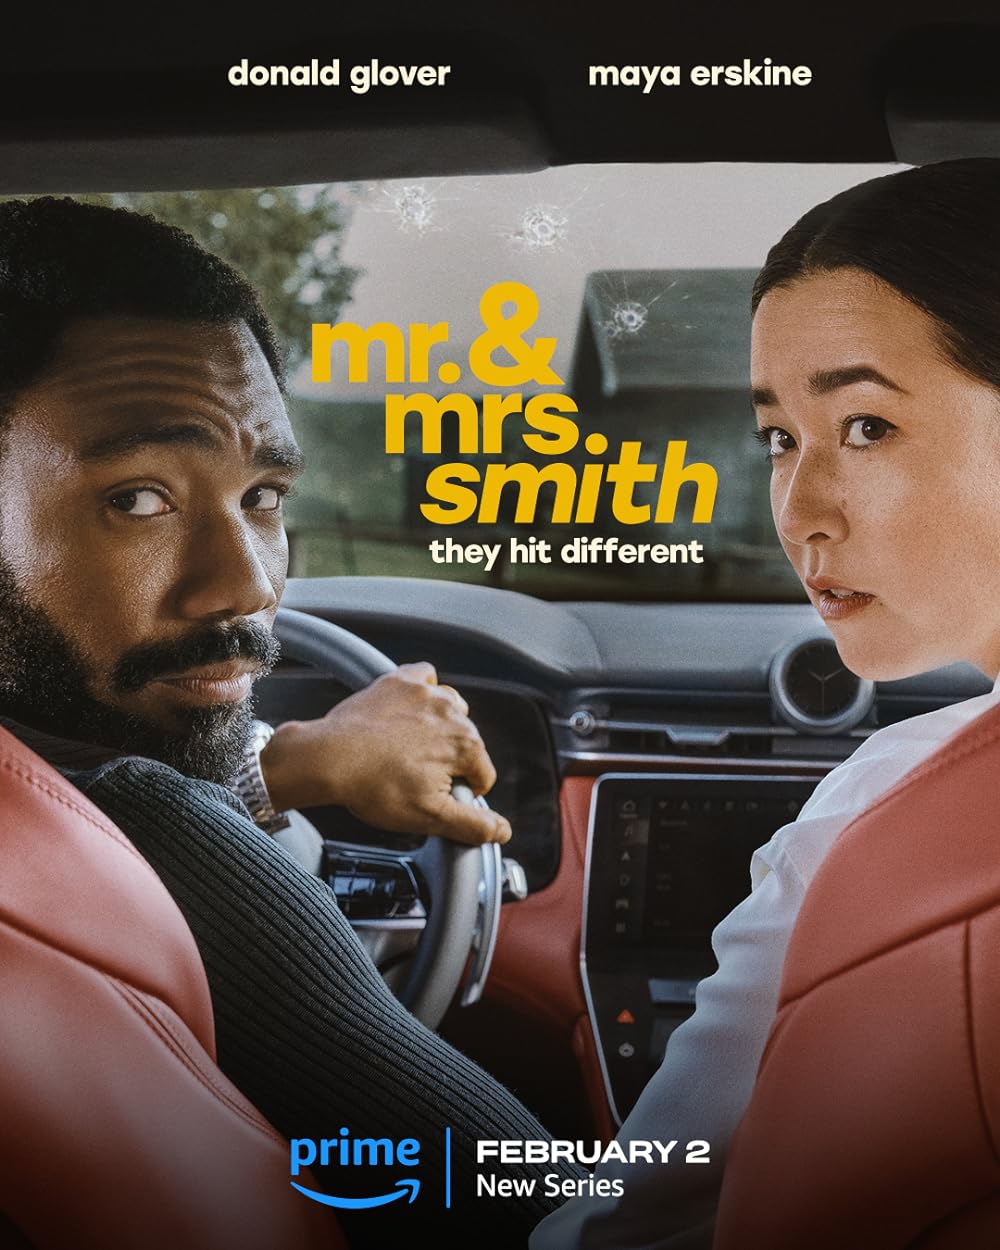 Mr. & Mrs. Smith (February 2) - Prime VideoThe series, starring Donald Glover and Maya Erskine, follows two strangers recruited by a mysterious spy agency who are offered a life of espionage, wealth, and world travel. The catch: they must assume new identities and enter into an arranged marriage.